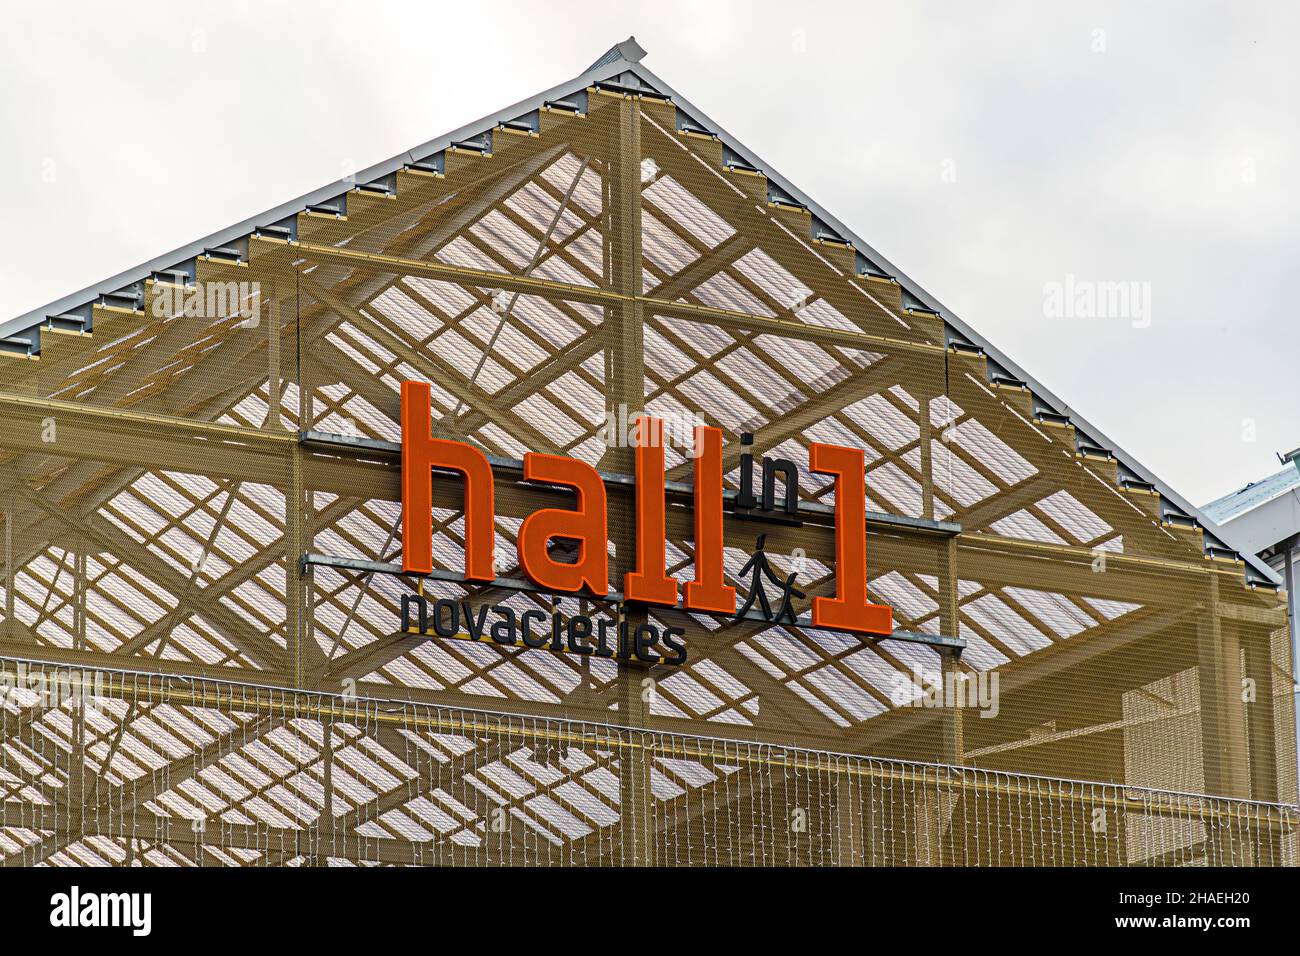 'Hall in one' is the name of the new shopping center and leisure area in Saint-Chamond, France. It was built in 2018 in the halls of the former local steel industry (Compagnie des forges et aciéries de la Marine et d'Homécourt). In the former industrial complex is the shopping mall 'Hall in 1' with cinema, brasseries, leisure and shopping facilities. Stock Photo